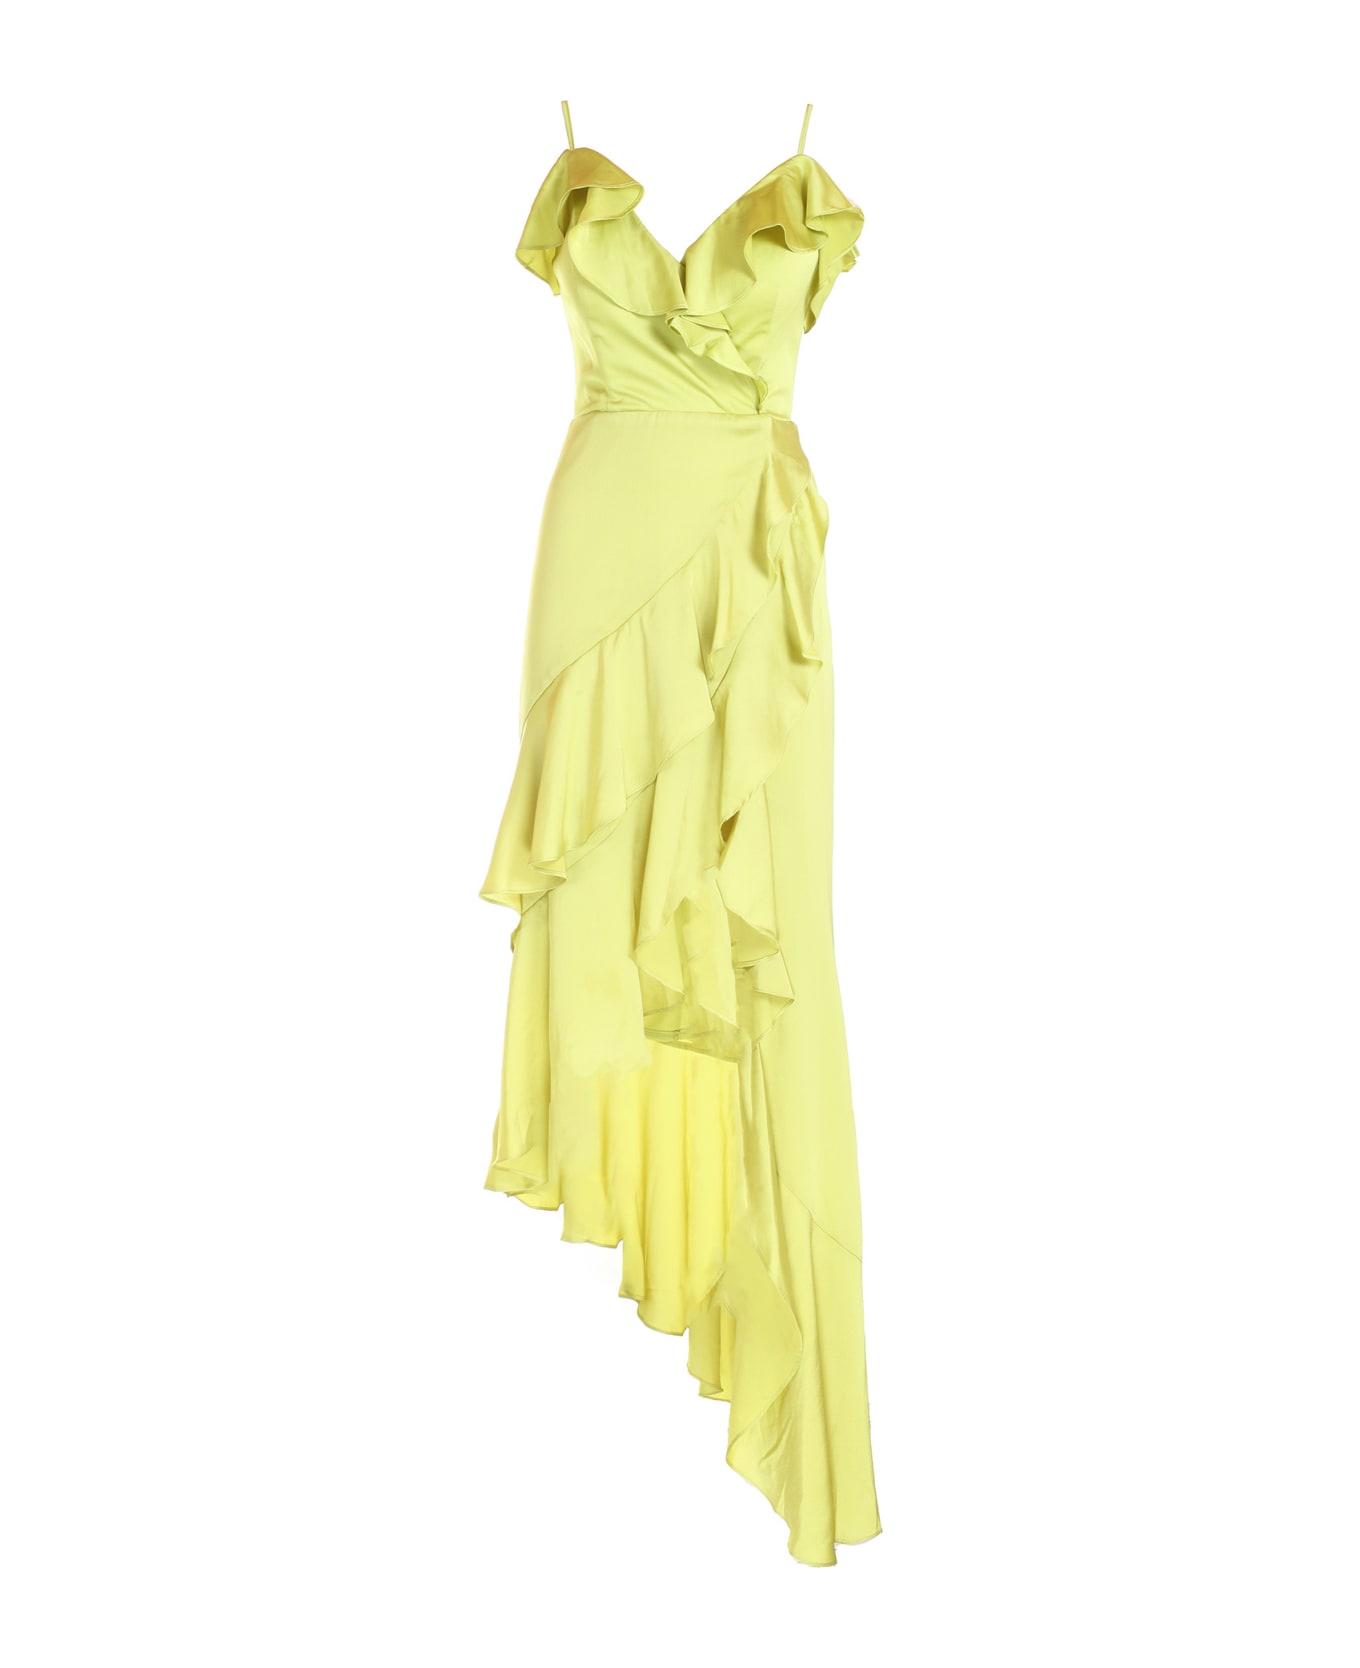 Forever Unique Foreverunique Dresses Yellow - Yellow